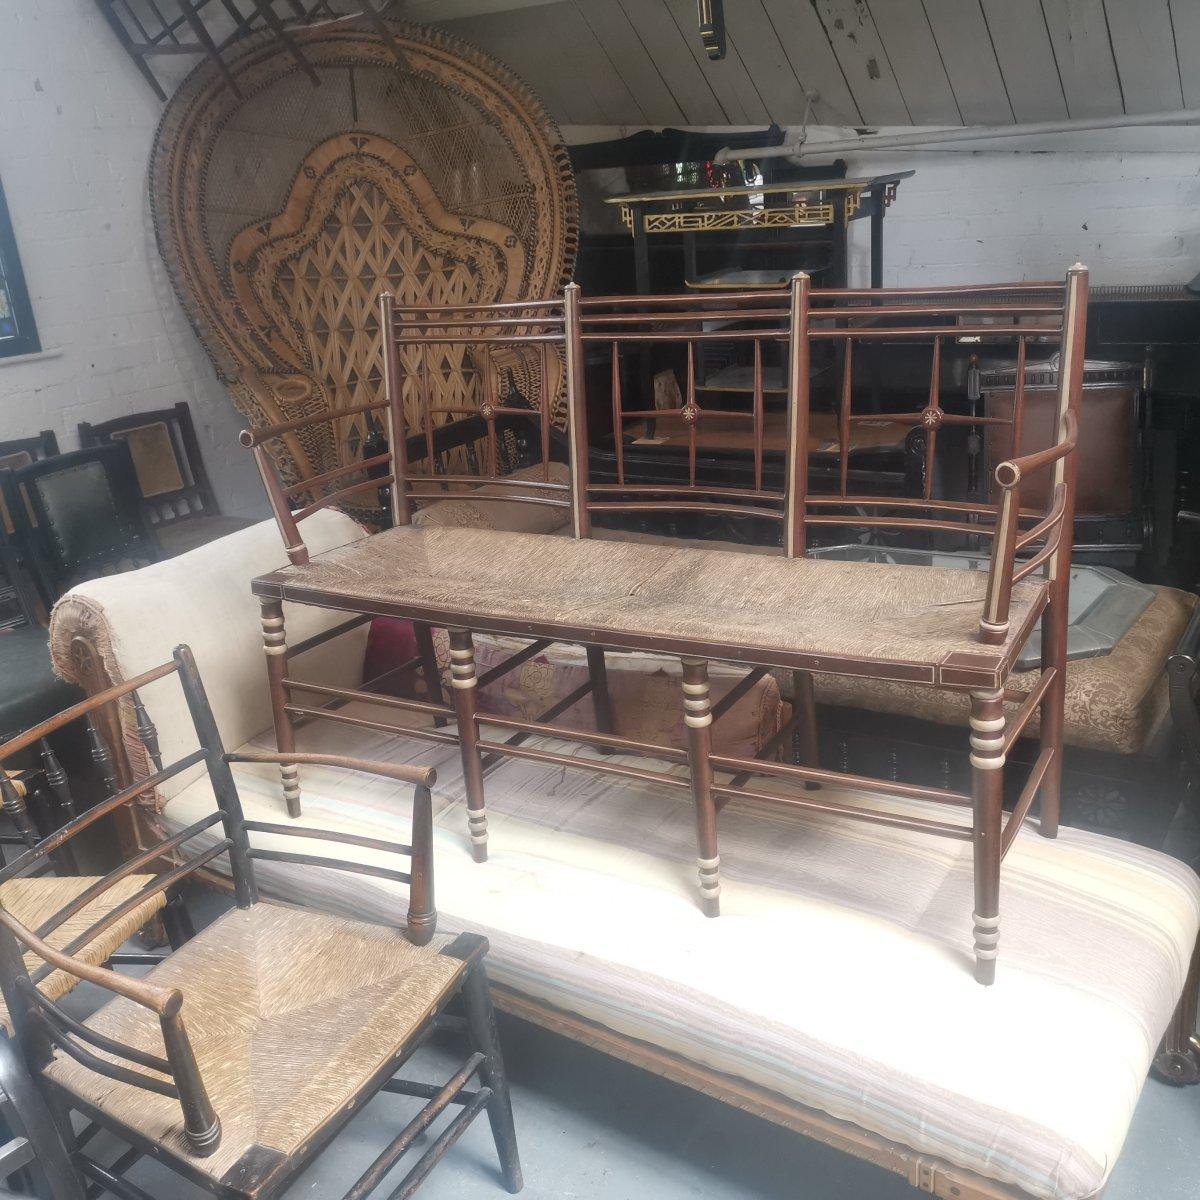 Late 19th Century William Morris, Ford Maddox Brown, a Rare Pair of Sussex Three Seater Settees